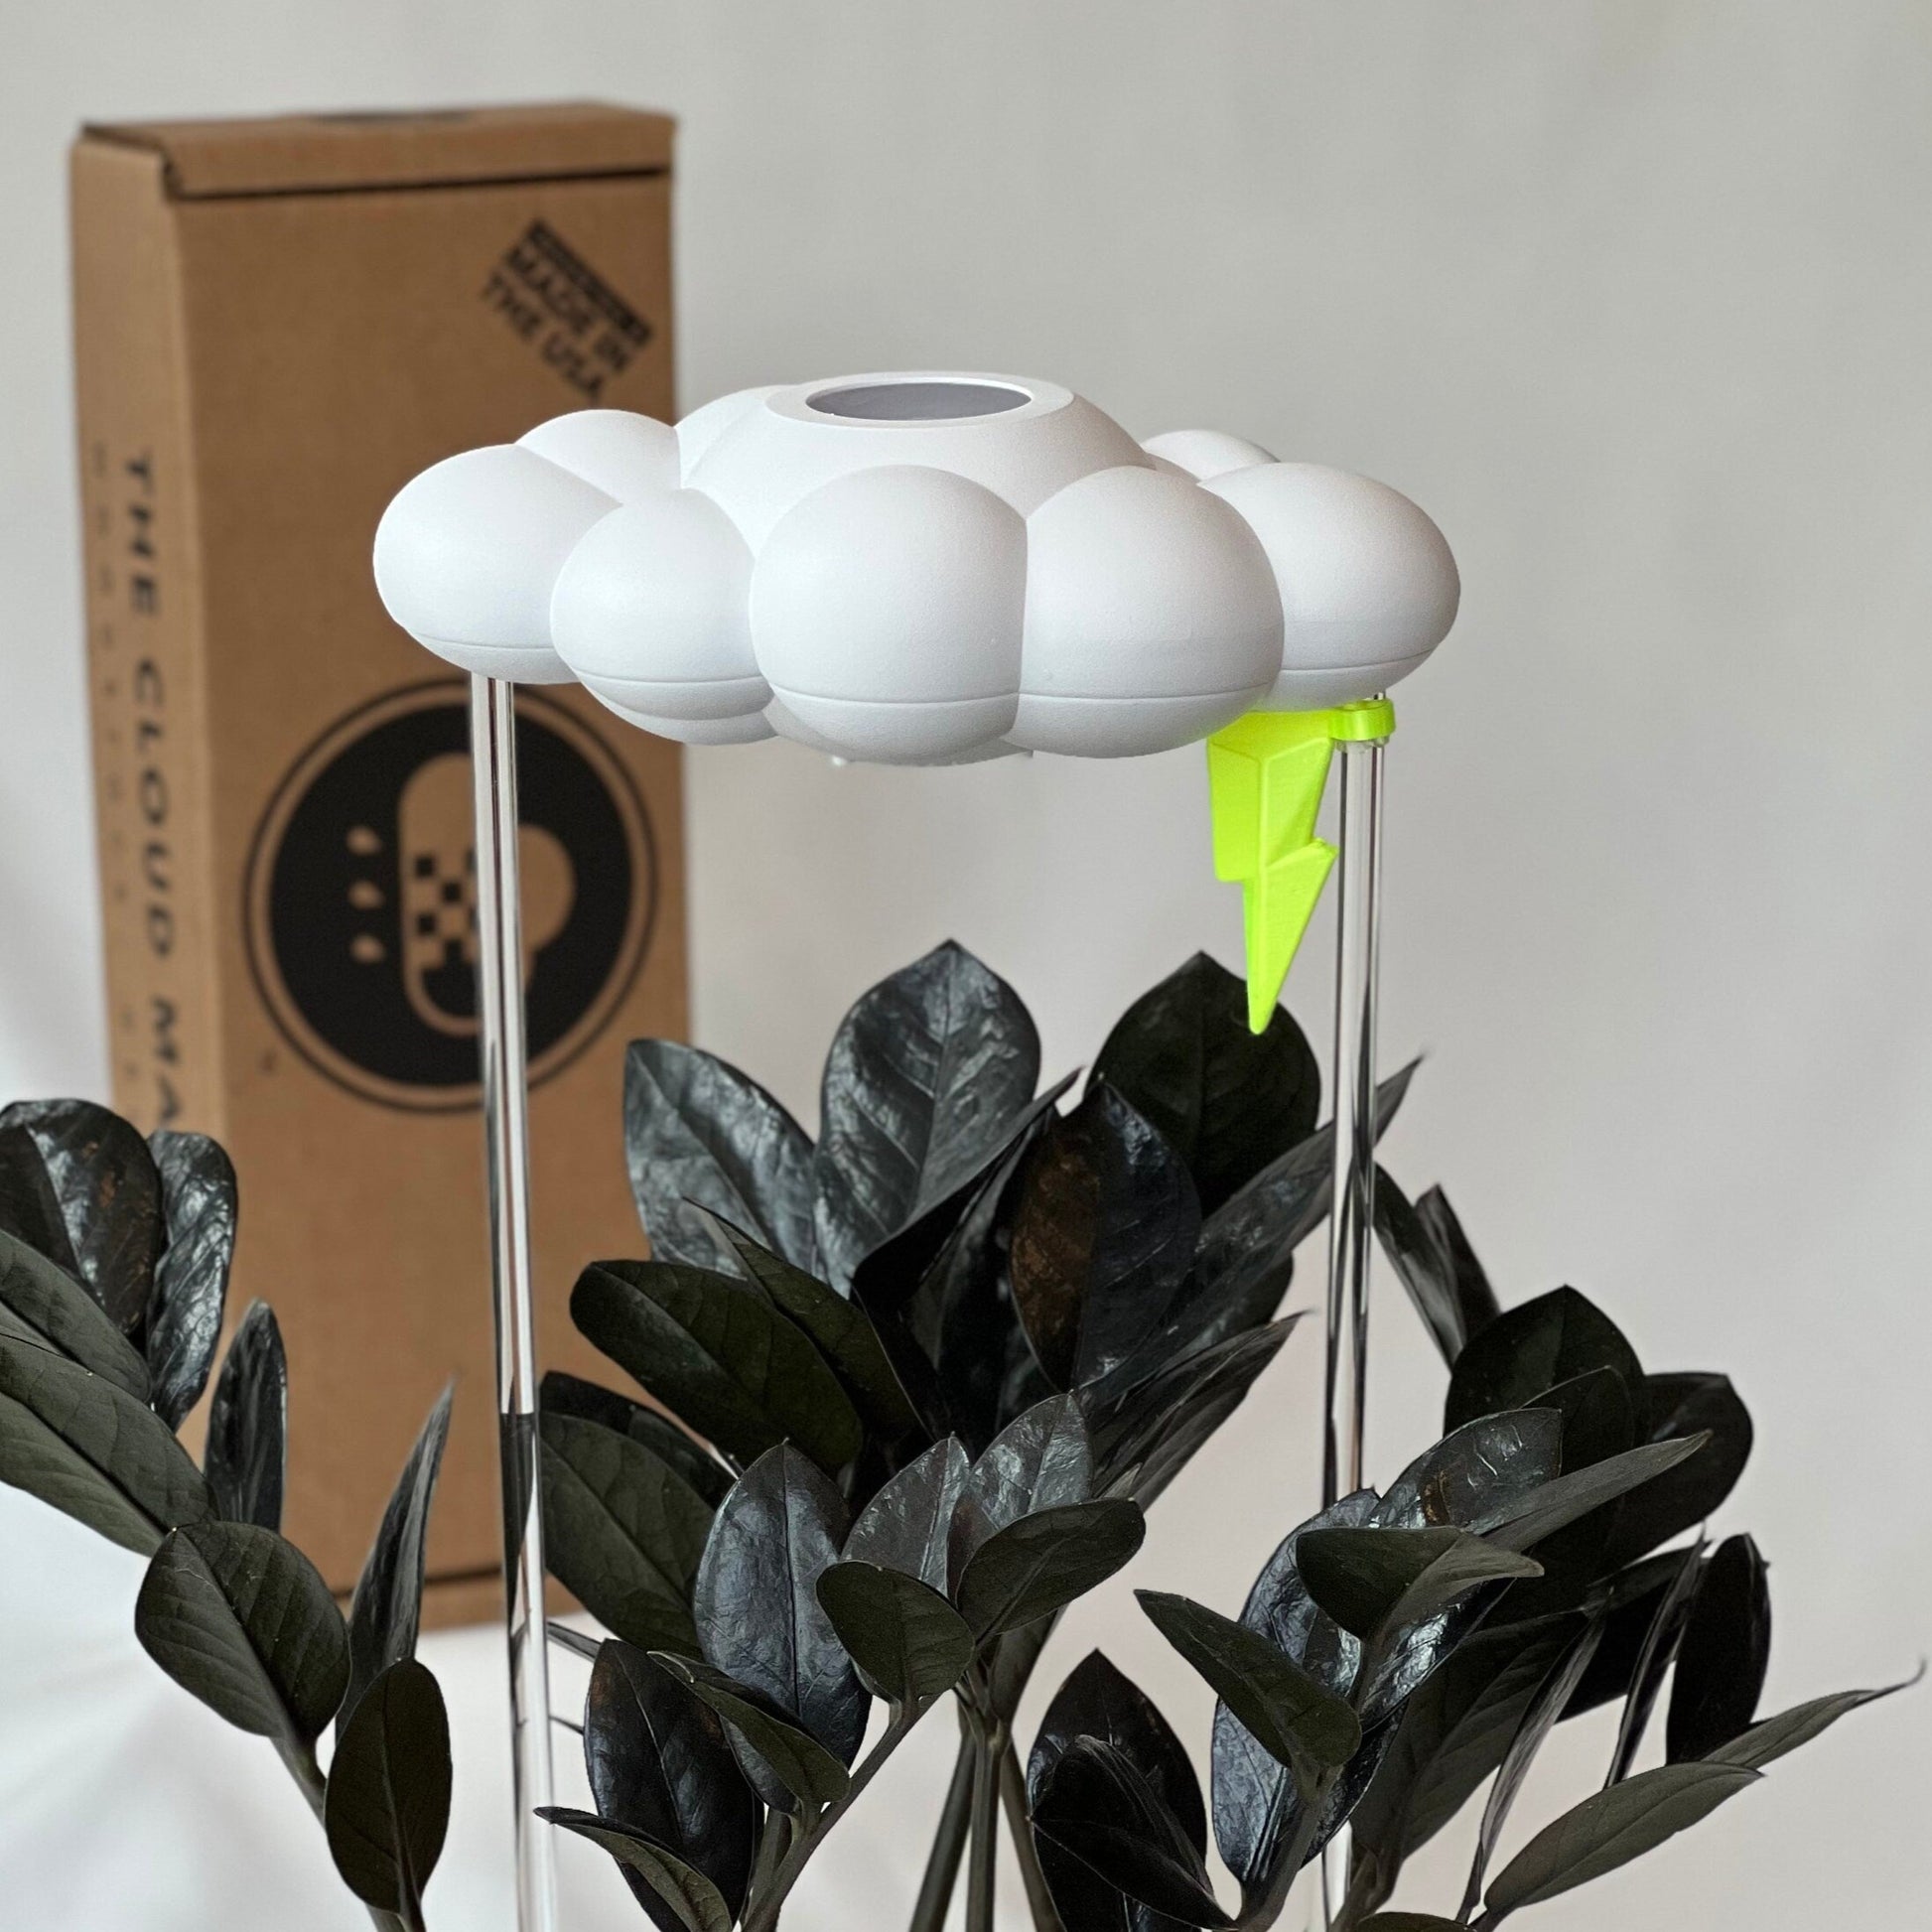 Original Dripping Rain Cloud with Neon Lightning Bolt by THE CLOUD MAKERS